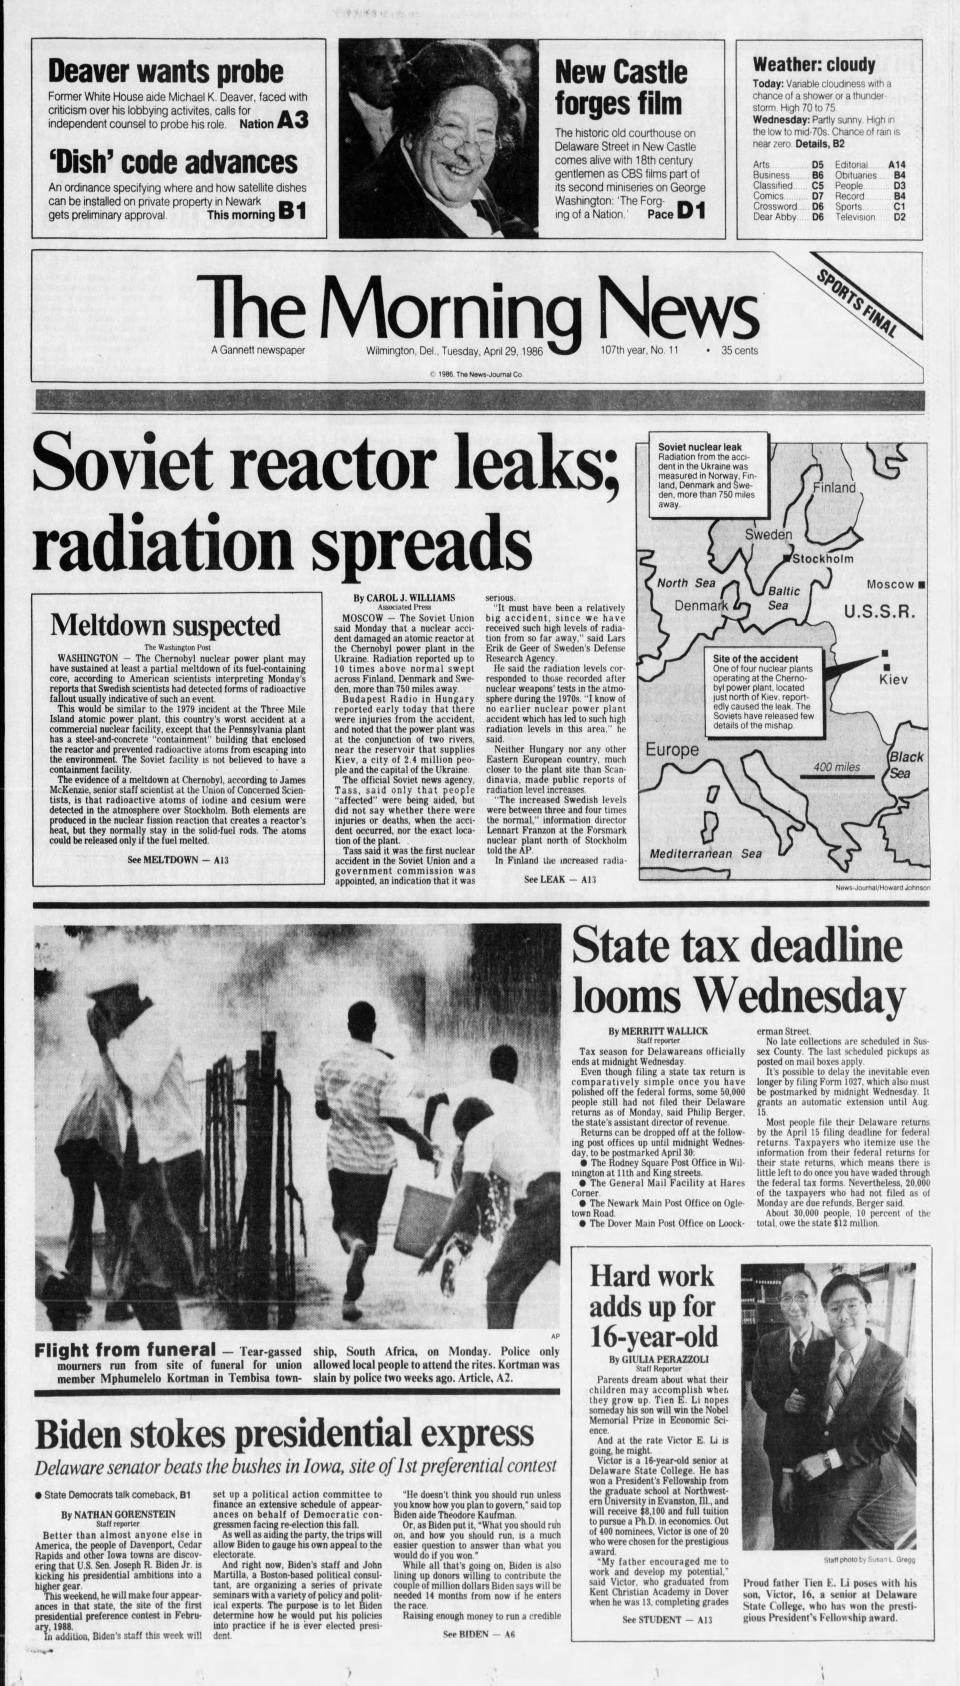 Front page of The Morning News from April 29, 1986.